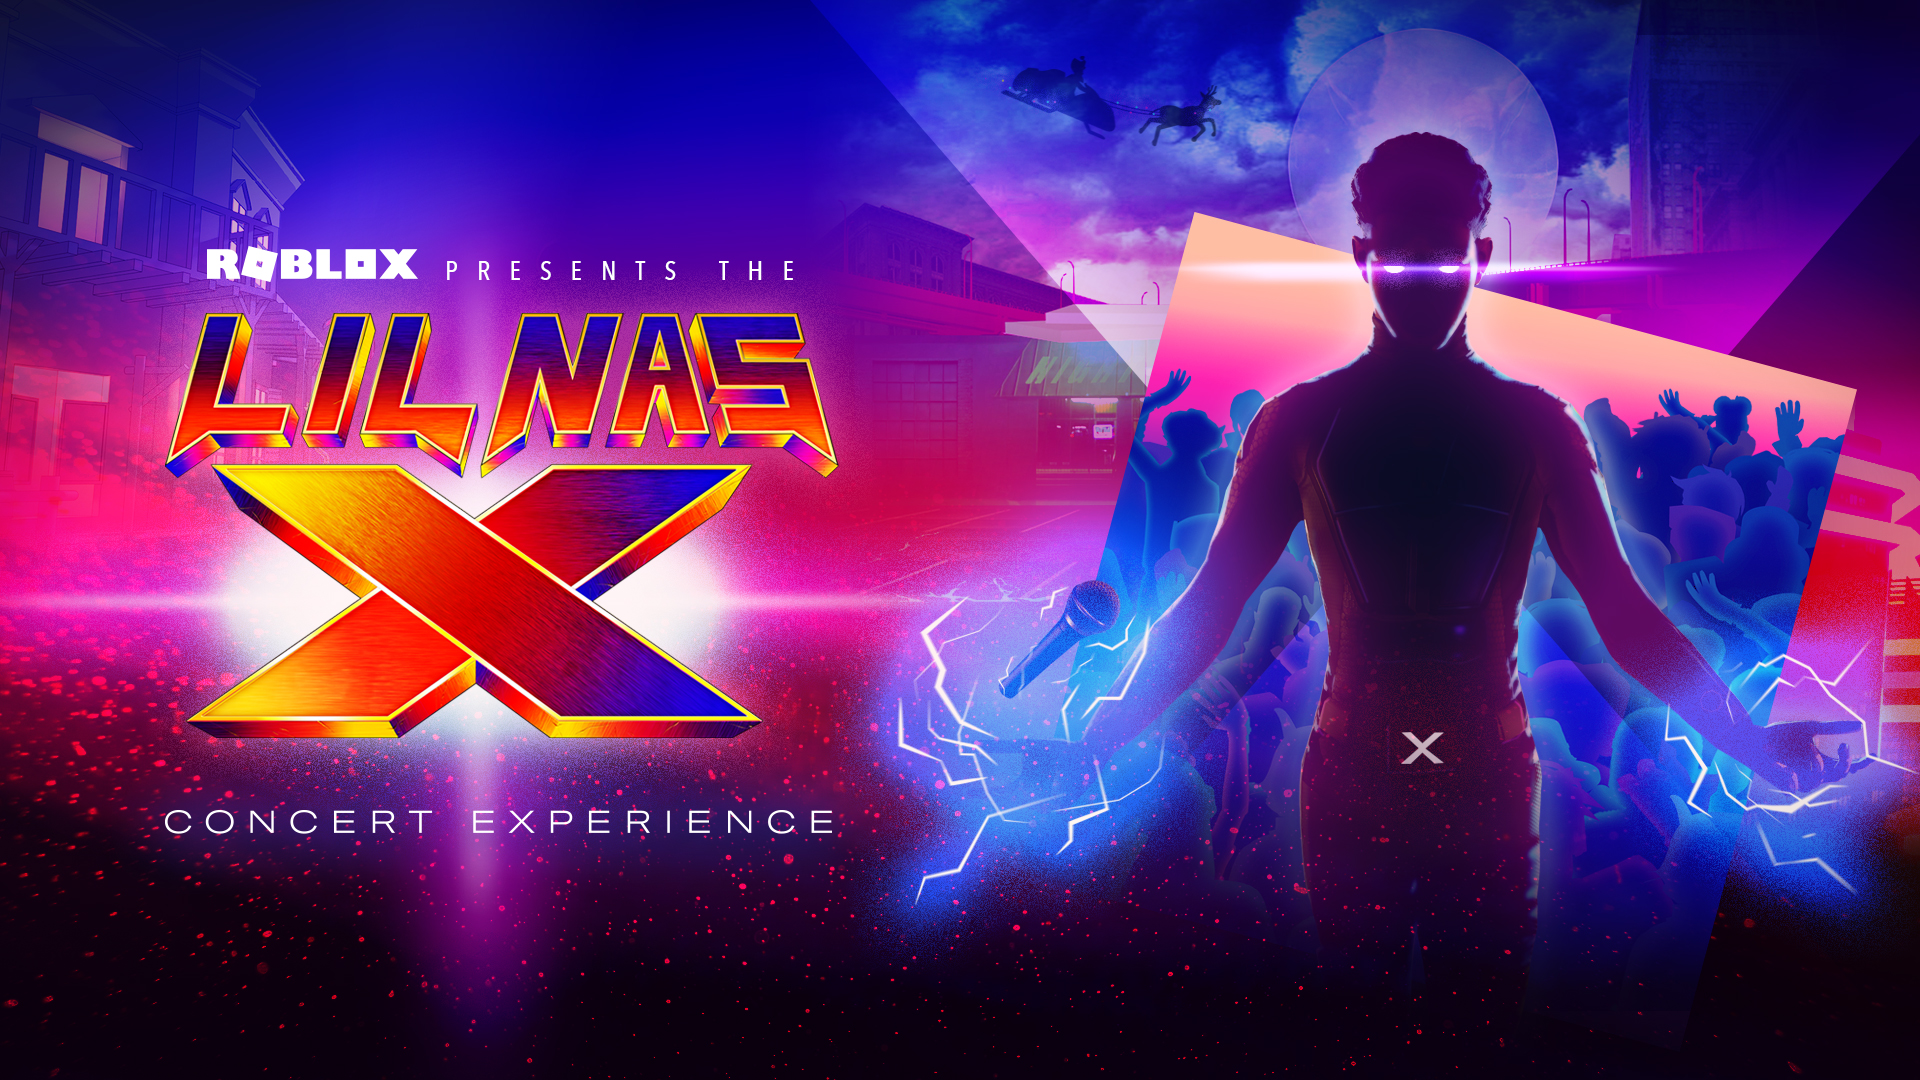 Roblox Presents Lil Nas X Concert Experience Poster